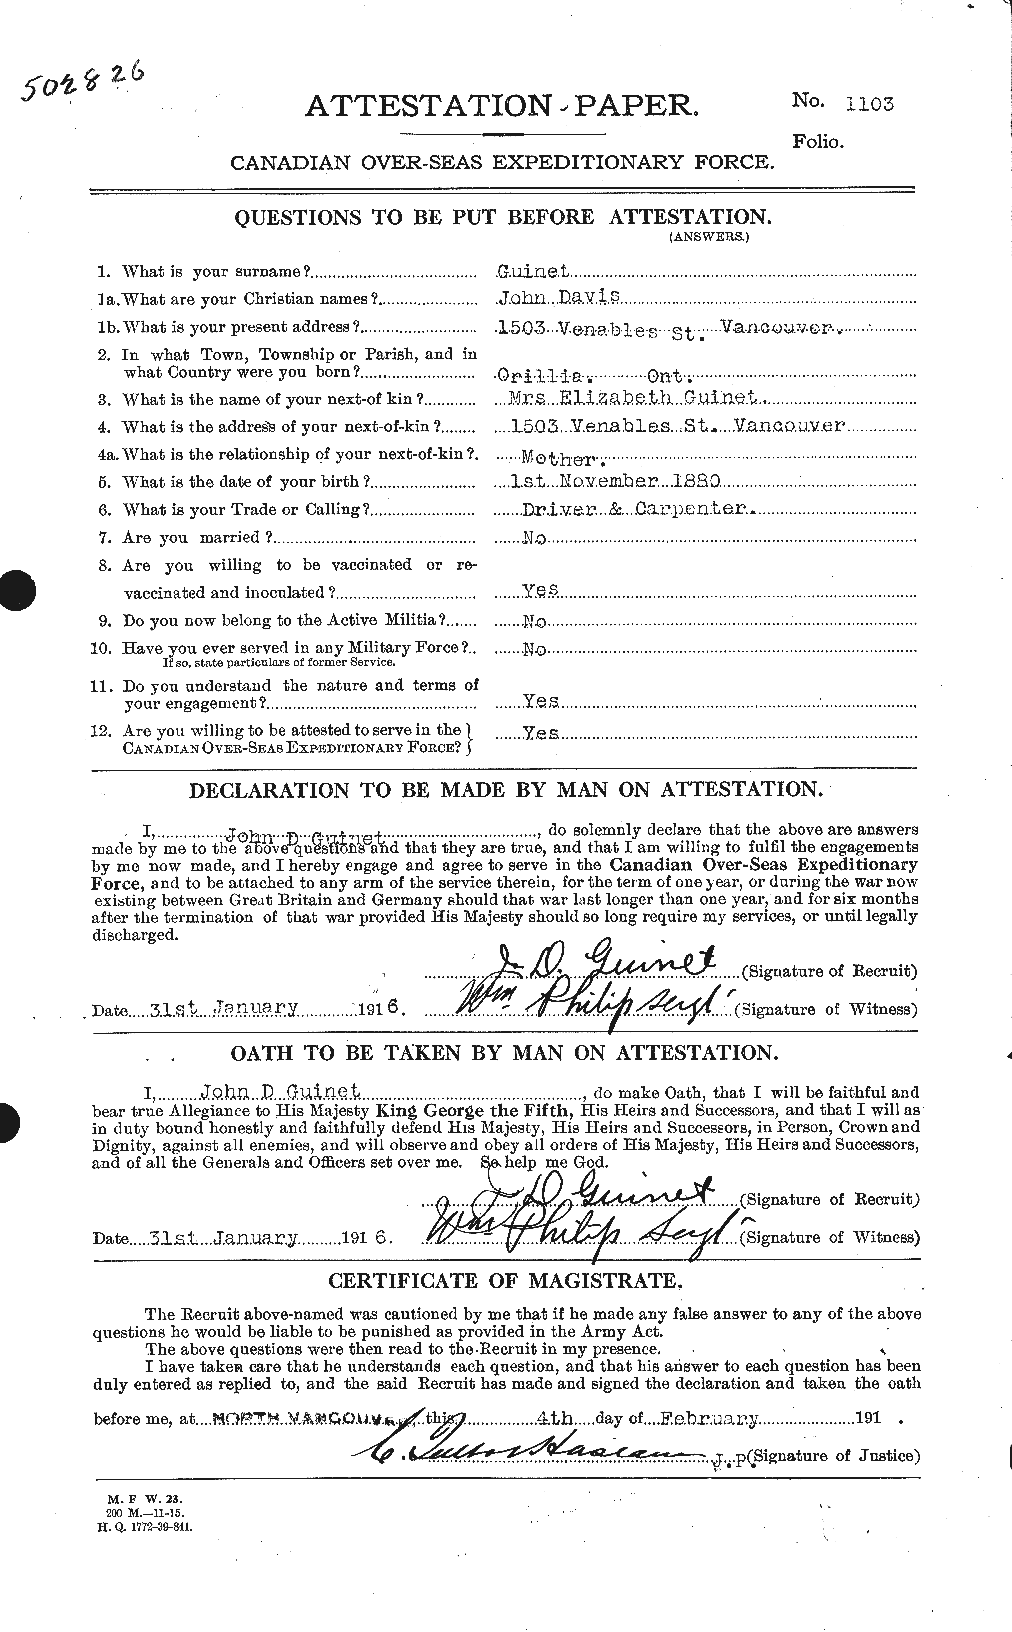 Personnel Records of the First World War - CEF 367798a